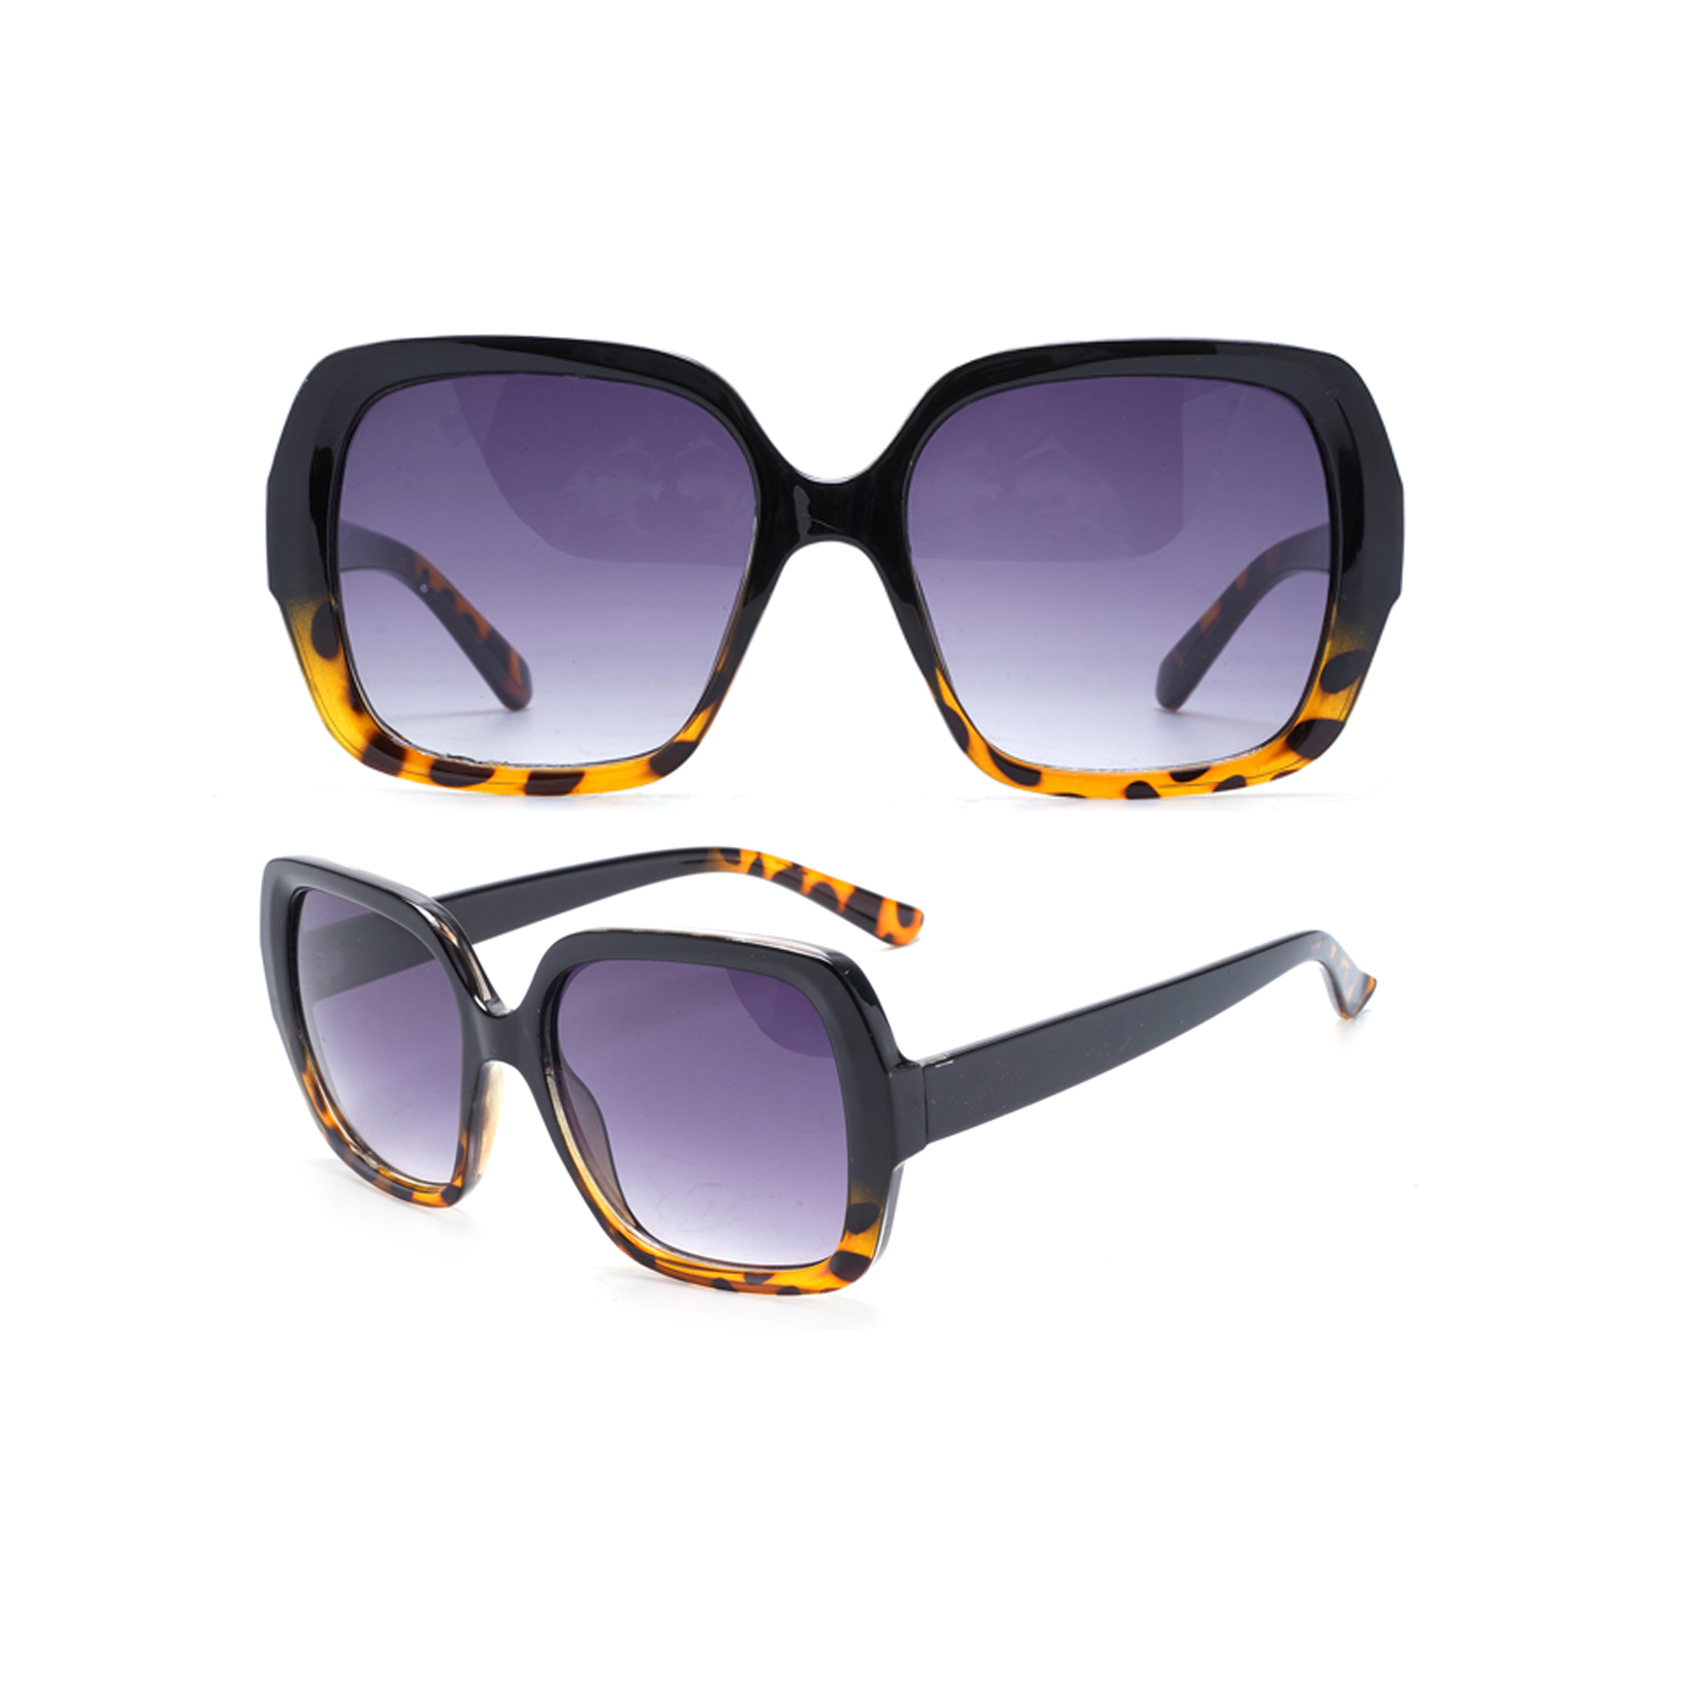 Finding Sunglasses Manufacturers of High Quality in China